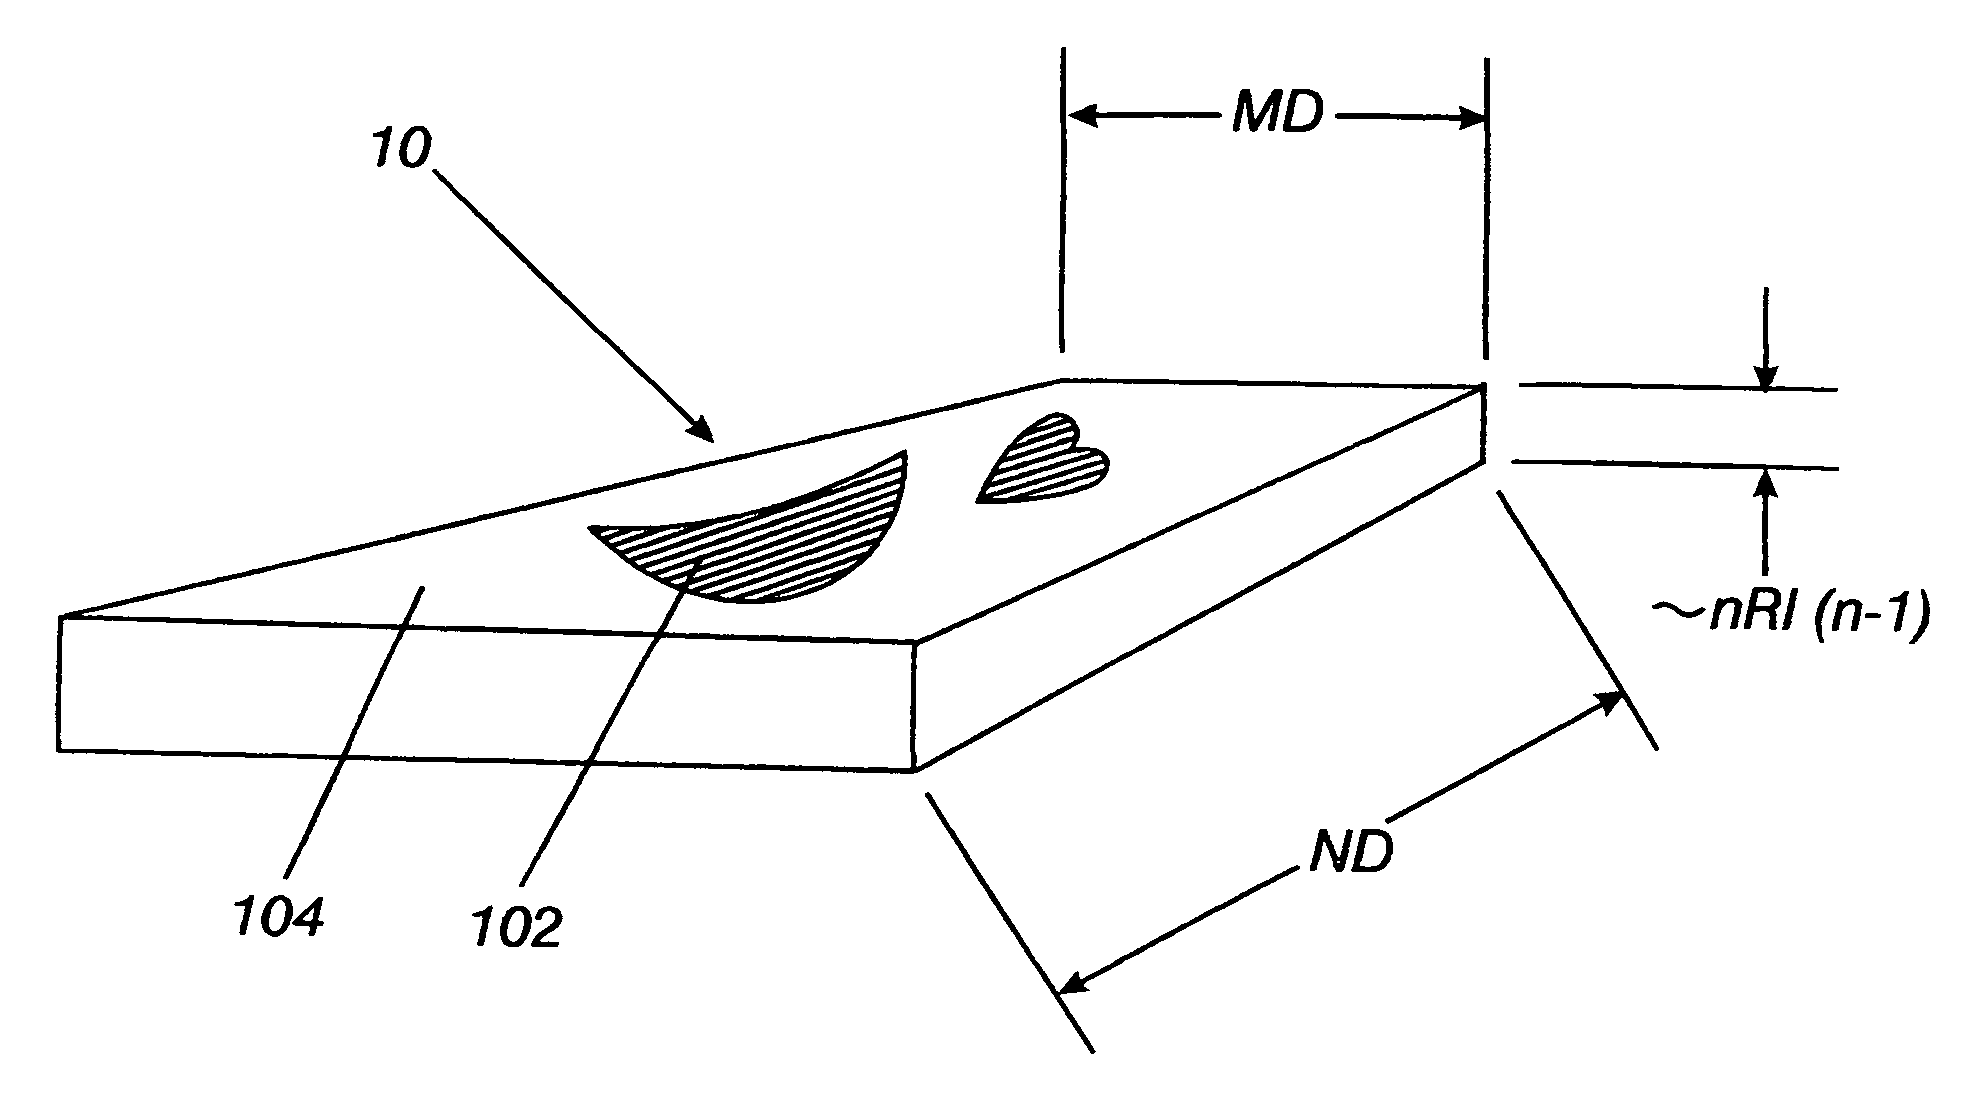 Method of producing a sheet having lenticular lens in pre-selected areas